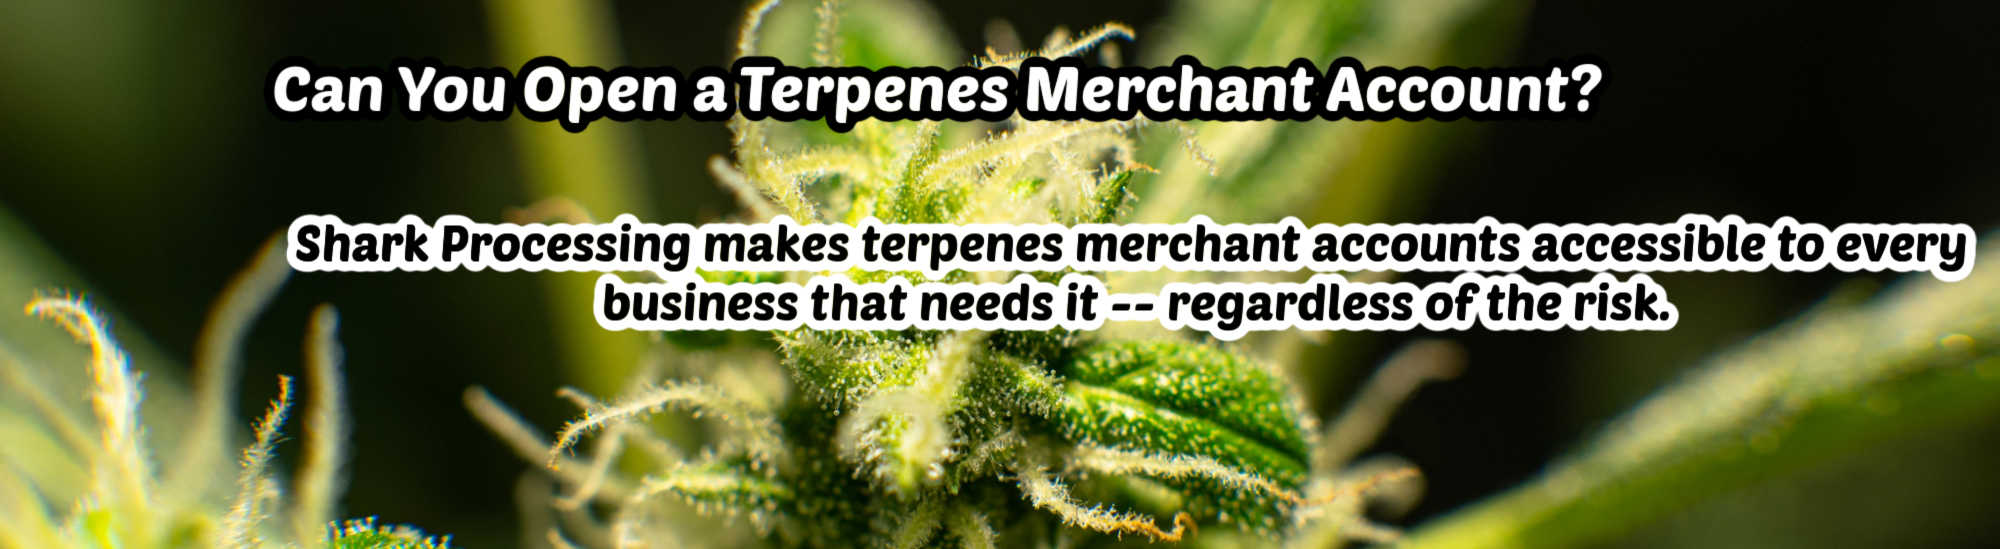 image of can you open a terpens merchant account